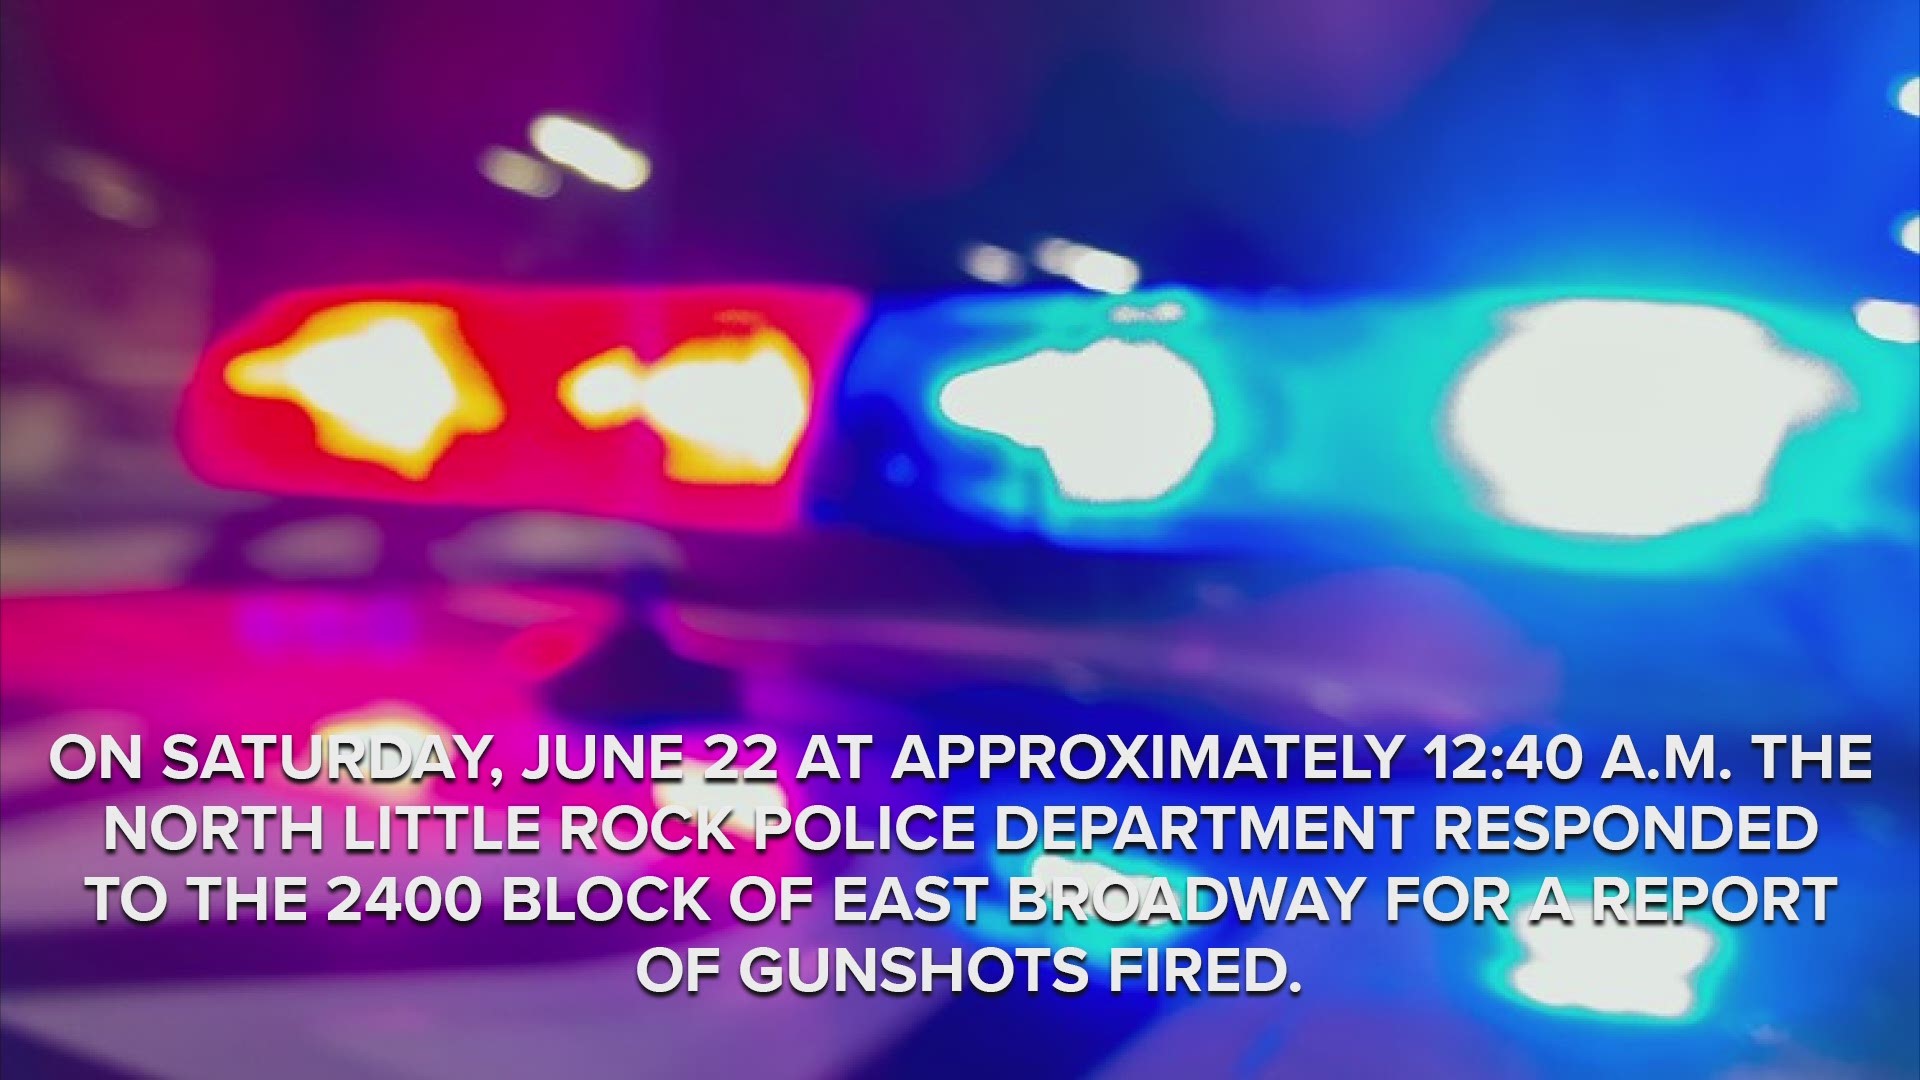 On Saturday, June 22 at approximately 12:40 a.m. the North Little Rock Police Department responded to the 2400 block of East Broadway for a report of gunshots fired.